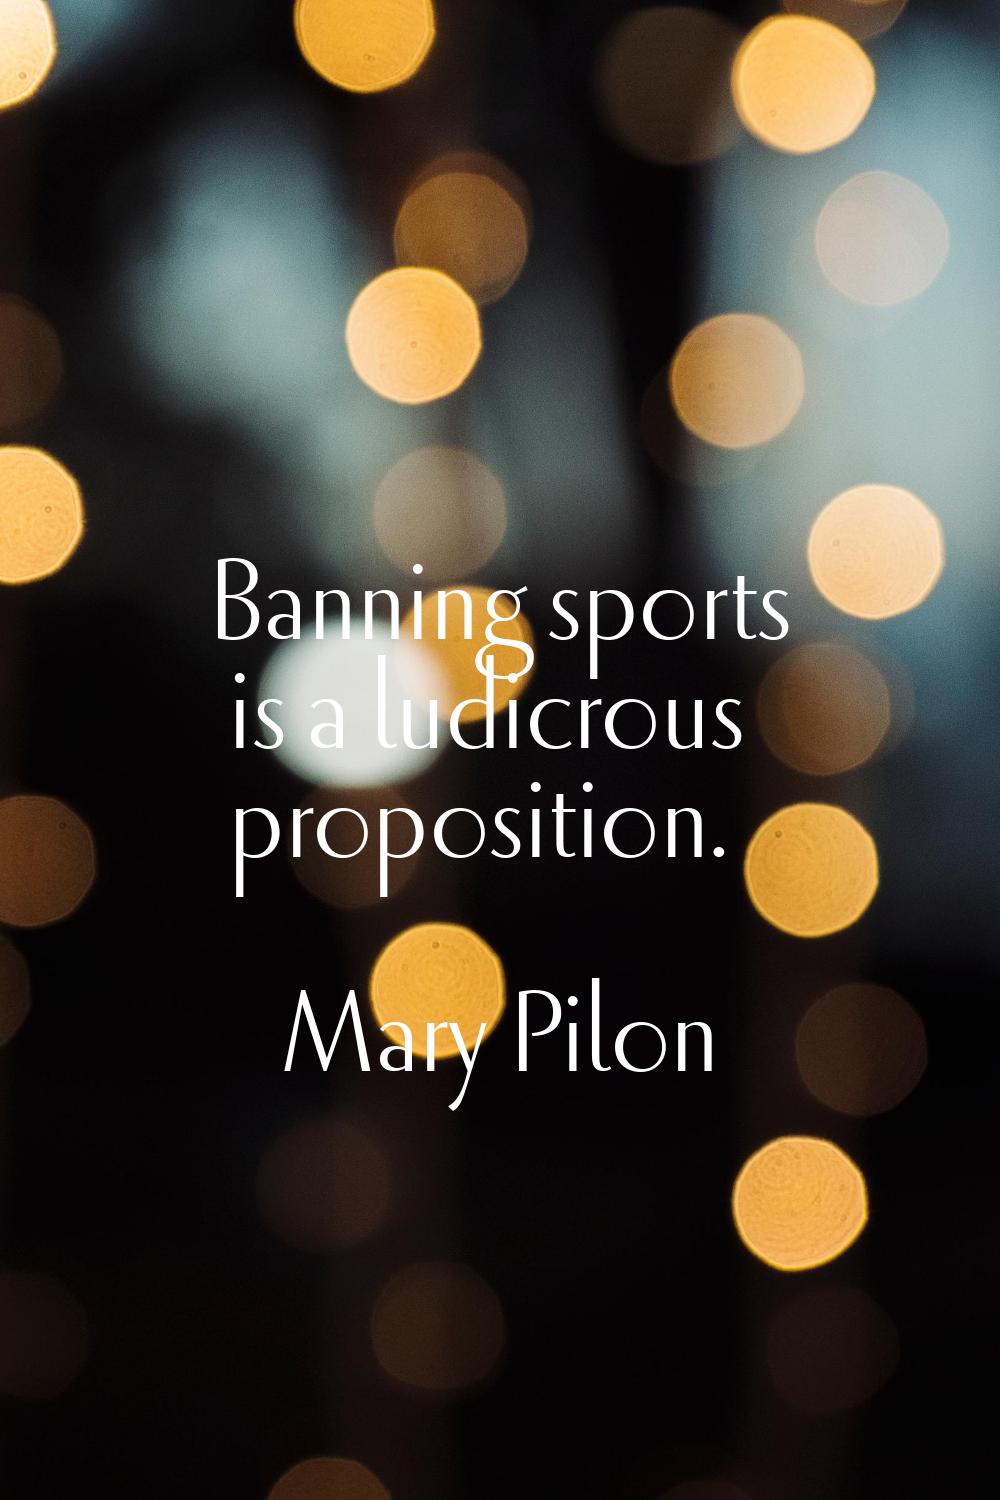 Banning sports is a ludicrous proposition.